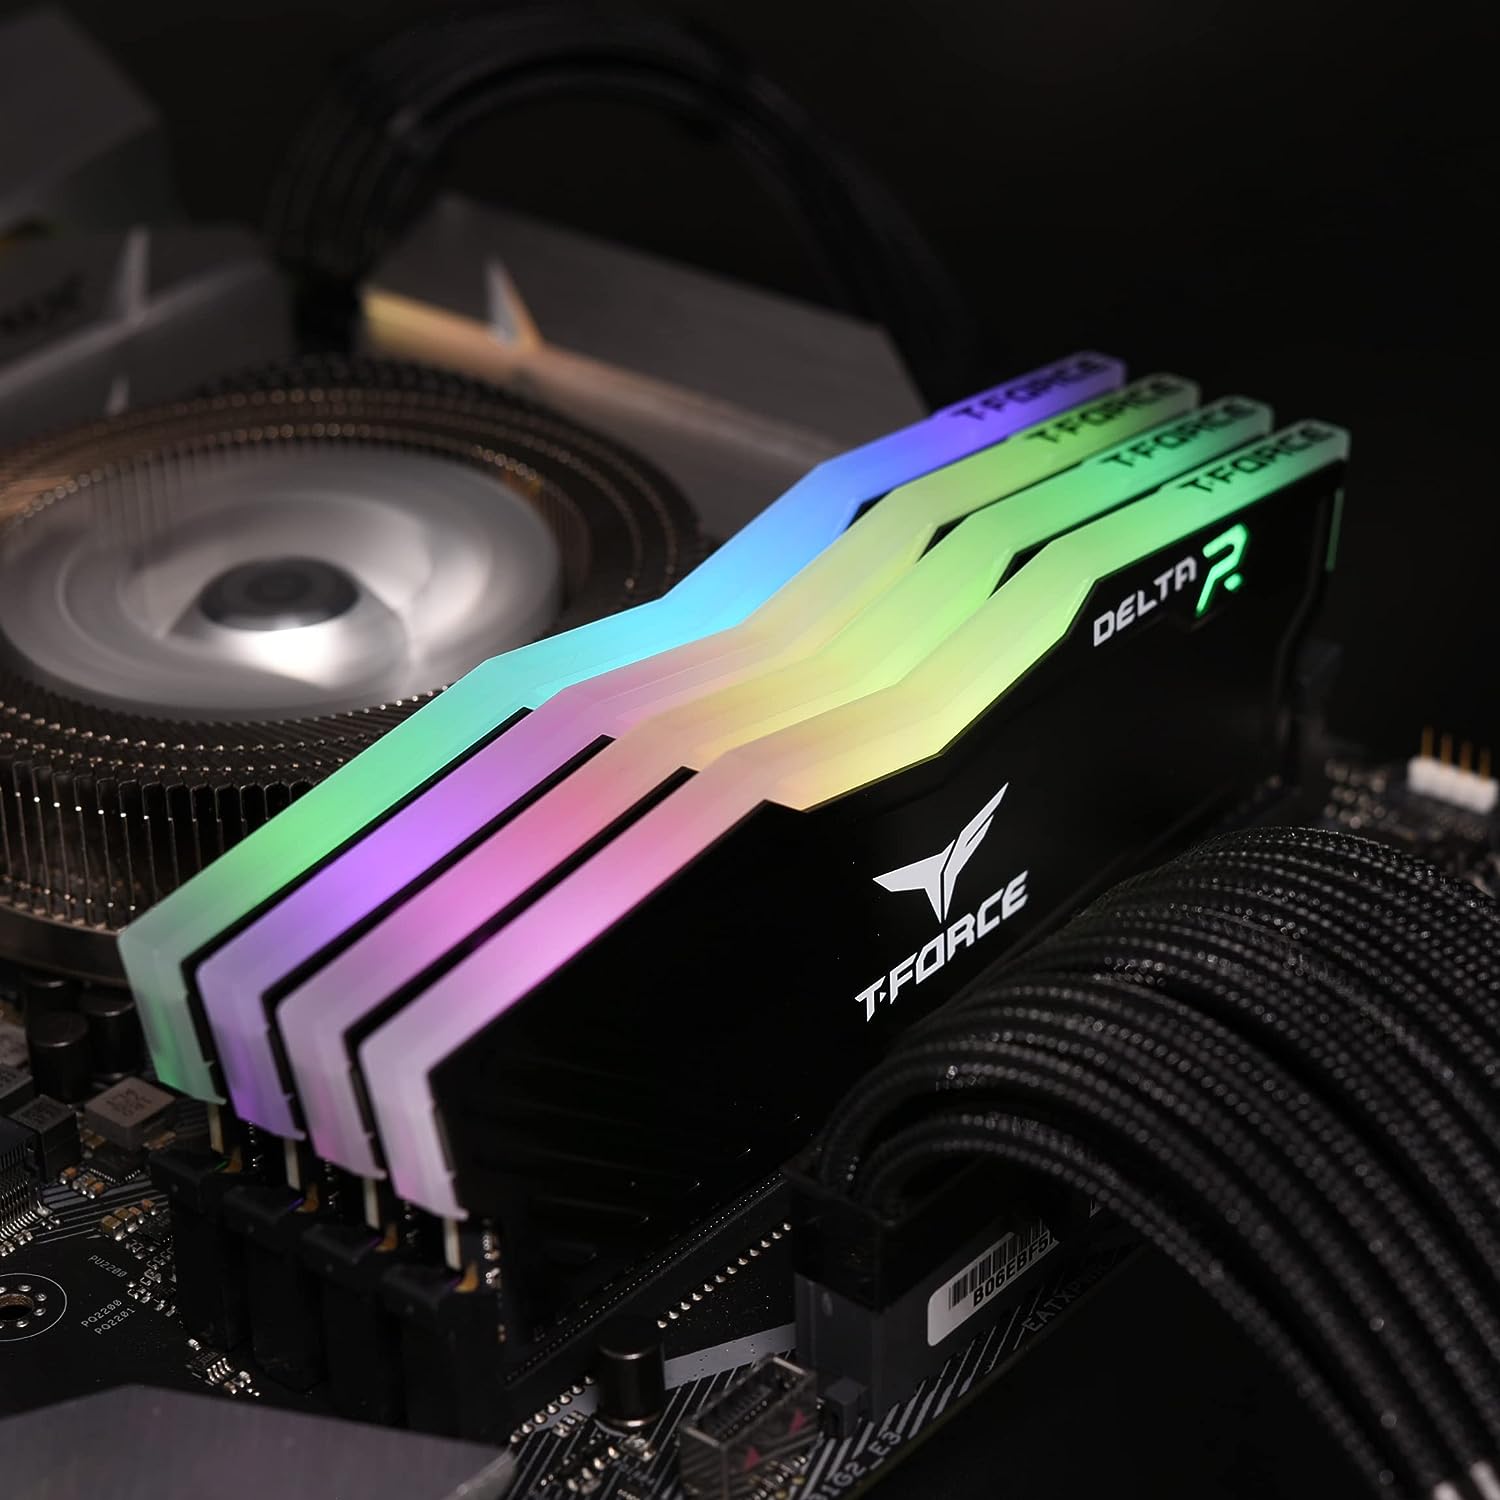 Team T-Force Delta RGB DDR4 Gaming Memory - Supports ASUS Aura Sync software synchronization. 0765441651777